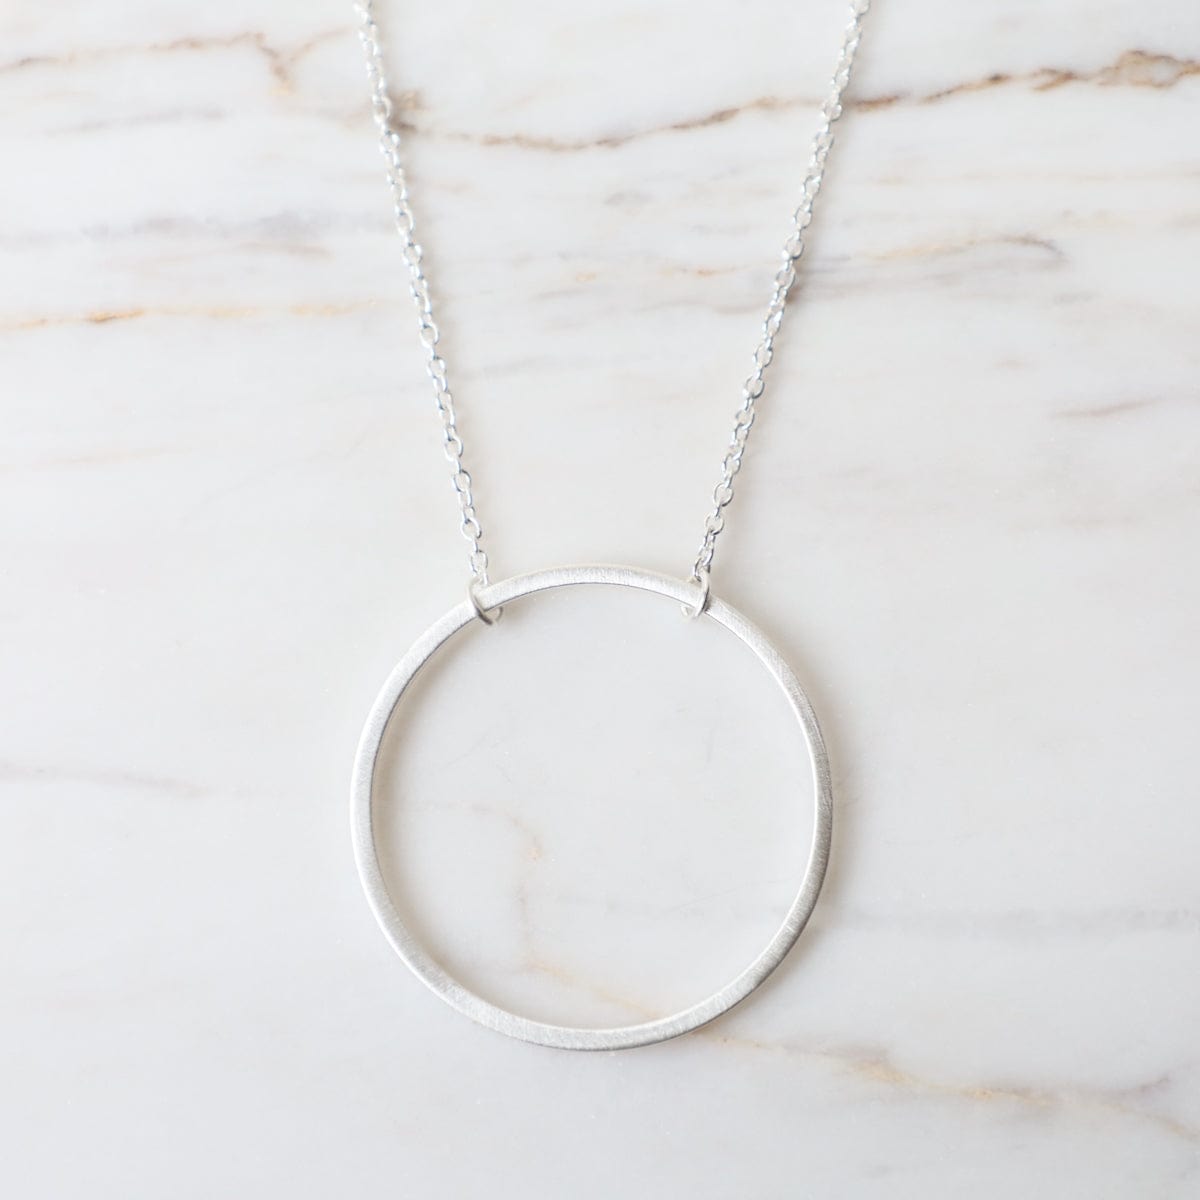 NKL Big Wire Circle Necklace in Brushed Sterling Silver